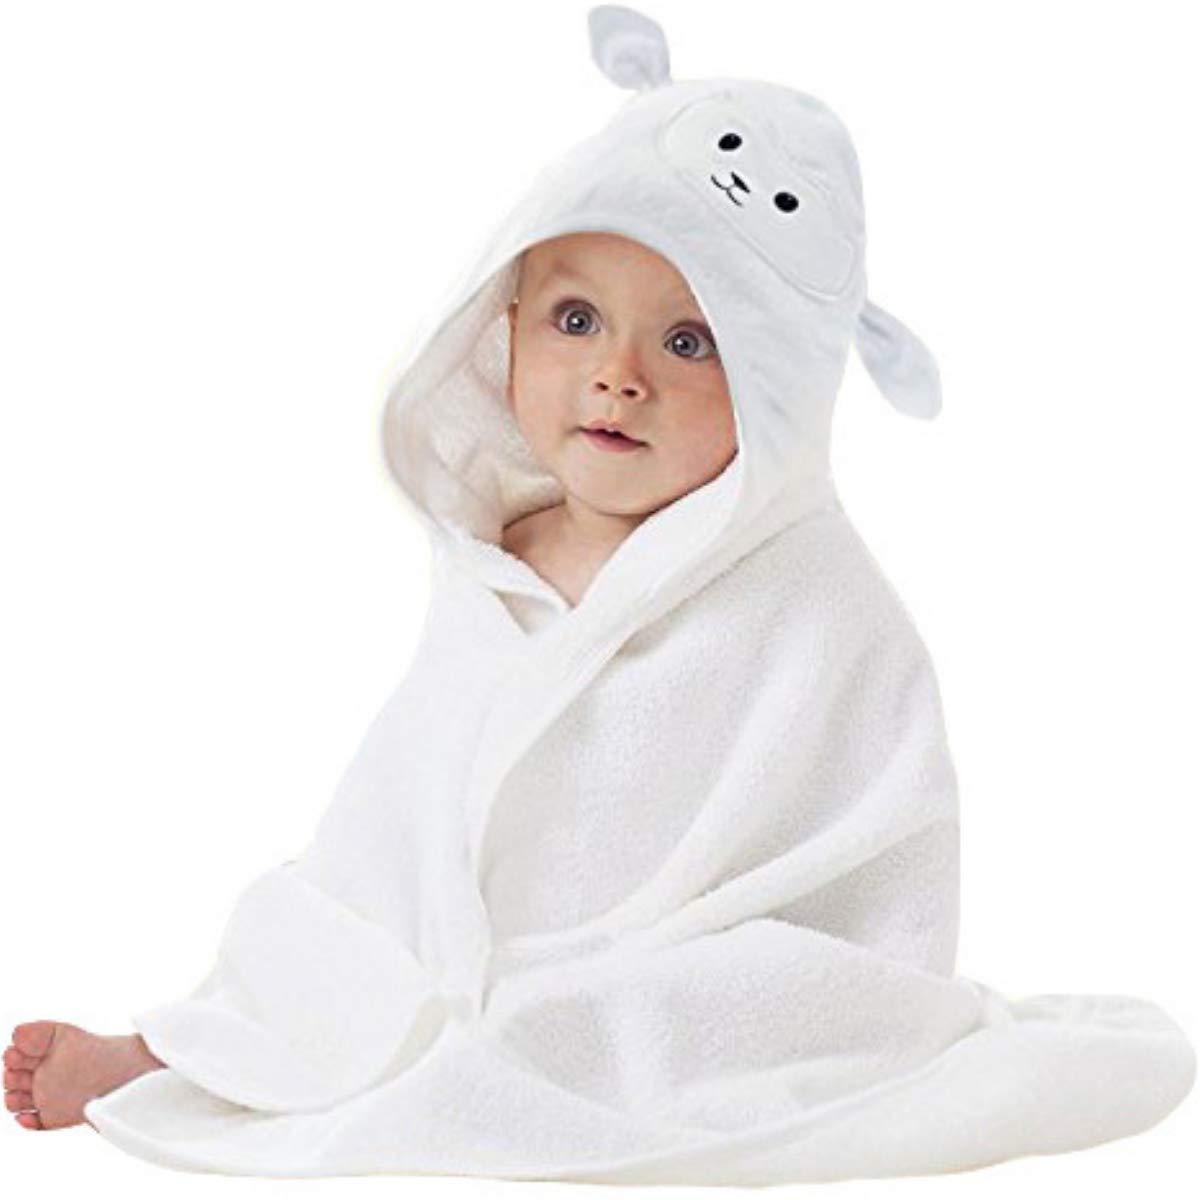 Lowest Price for Microfibre Sports Towel - Luxury New Design Wholesale Bath Towels bamboo fiber Quick-Dry Kids Hooded For Children Towel BT1 – Honest